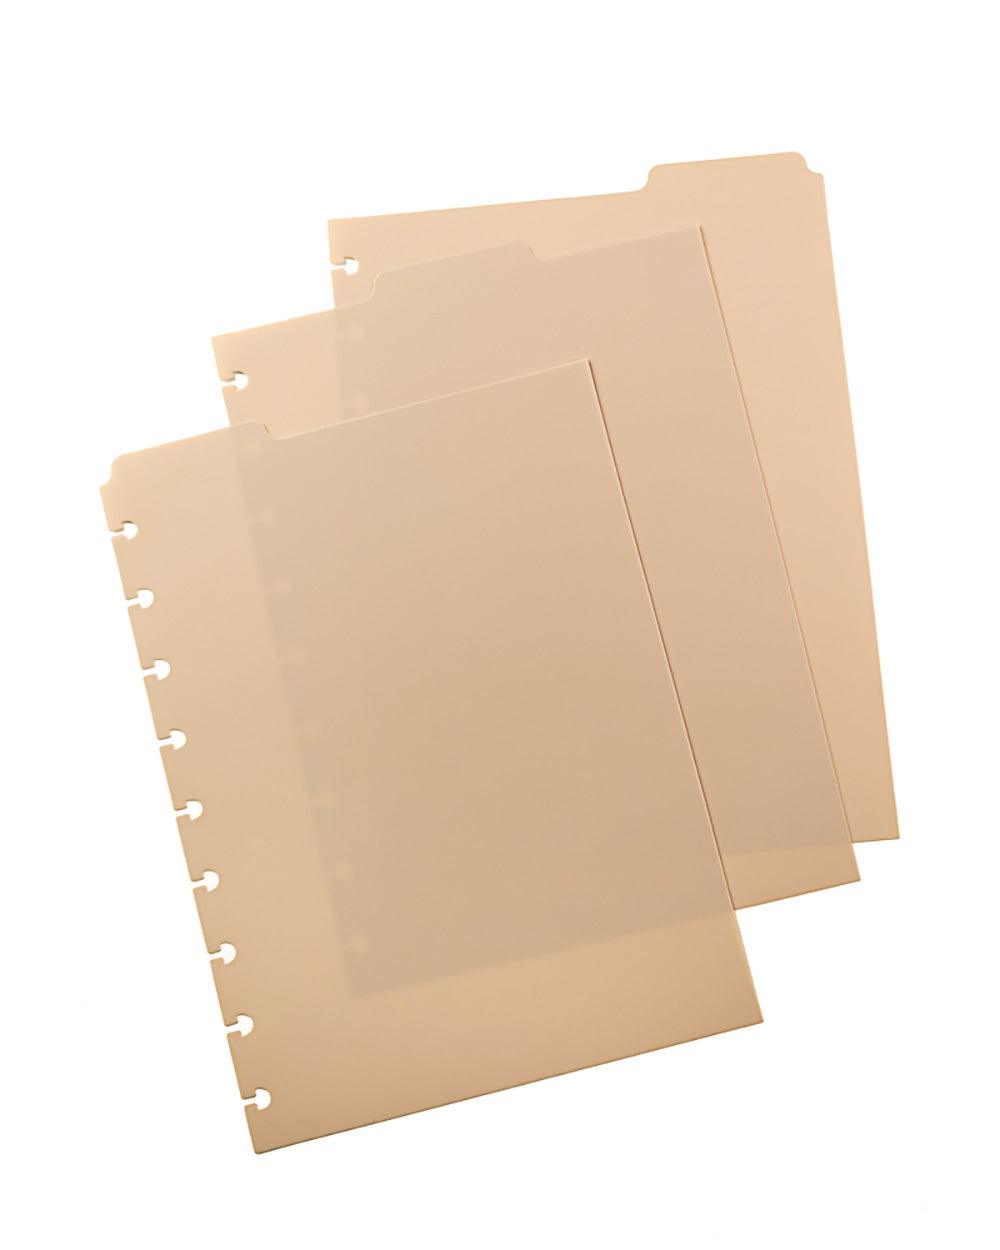 Beige top tabbed dividers by Jane's Agenda for discbound and ringbound planners.